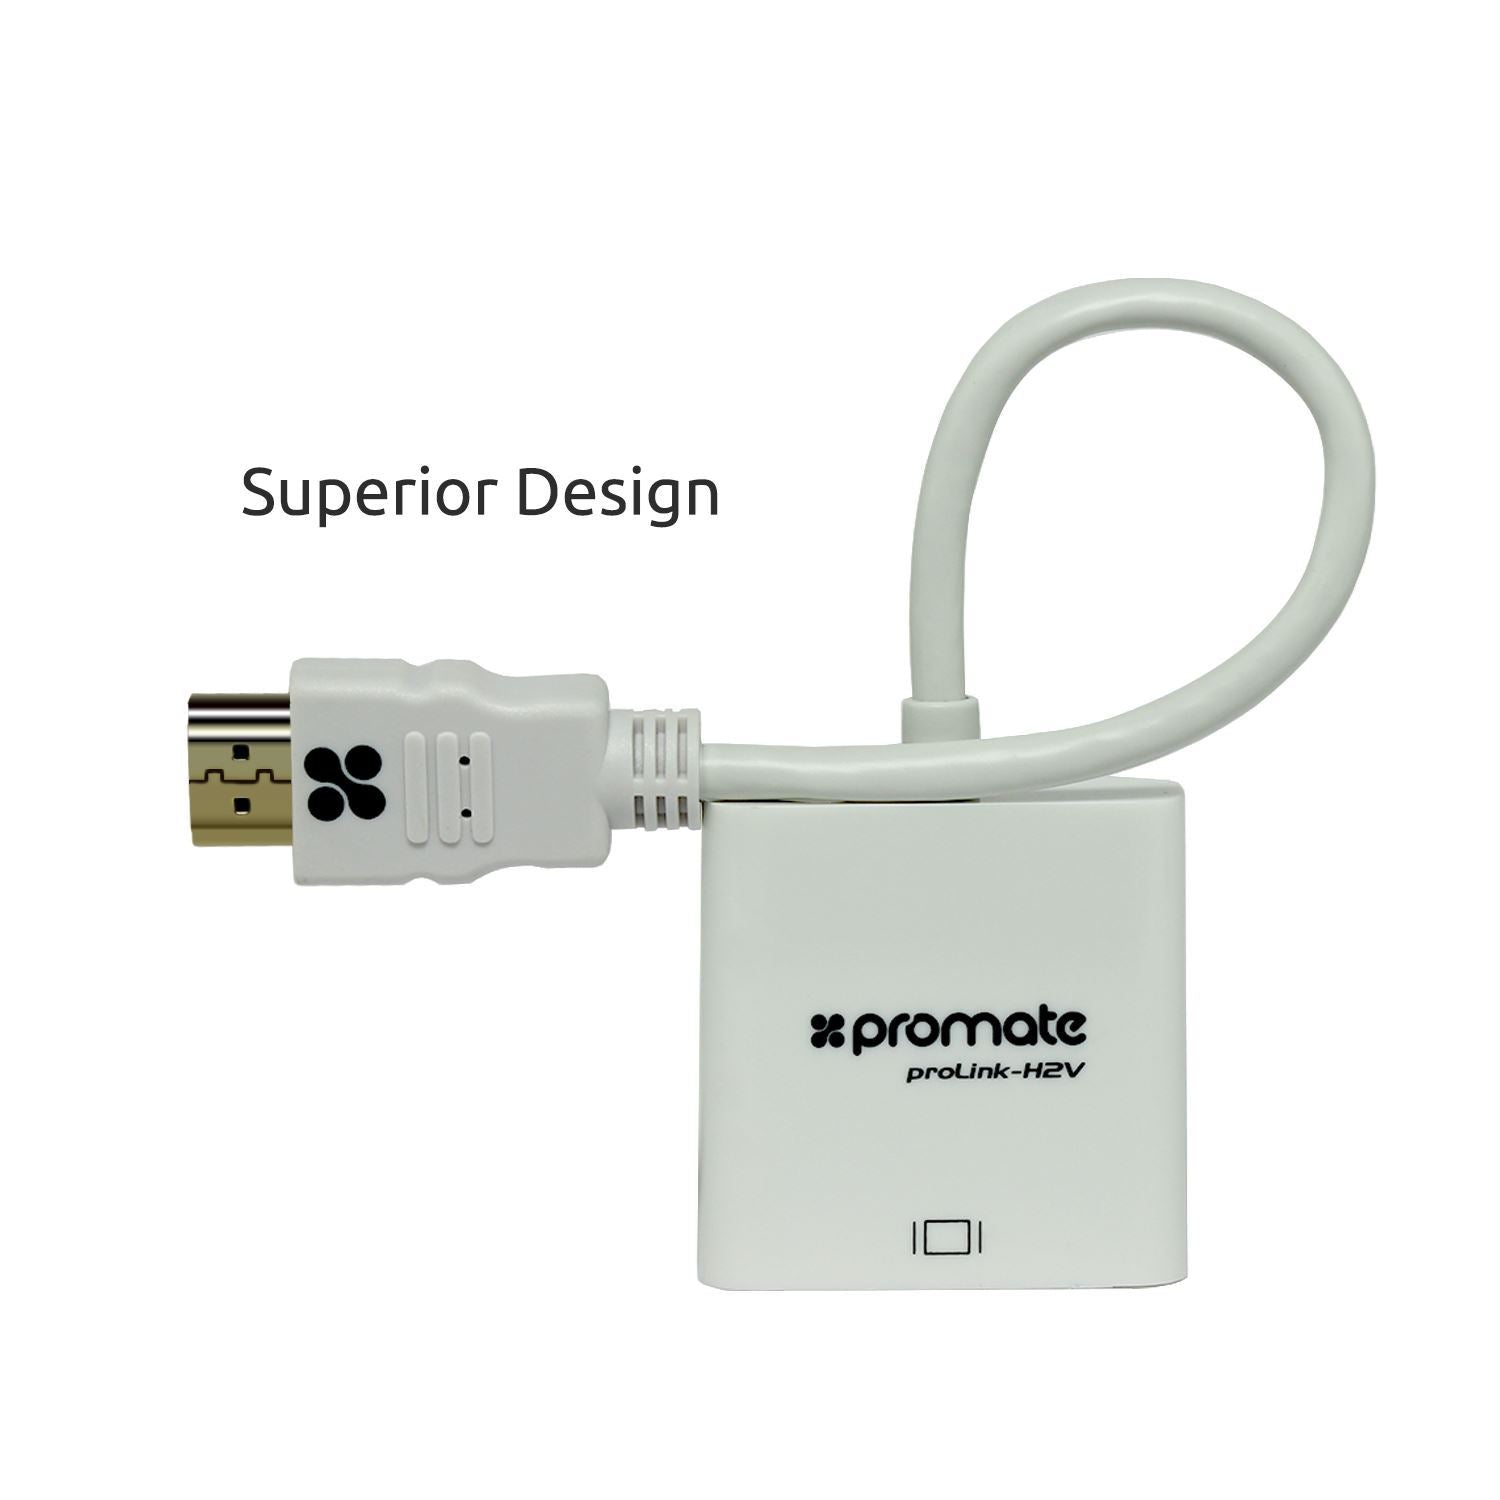 PROMATE_HDMI_(Male)_to_VGA_(Female)_Display_Adaptor_Kit._Supports_up_to_1920x1080@60Hz._Gold-Plated_HDMI_Connector._Supports_both_Windows_&_Mac._White_Colour. 1722